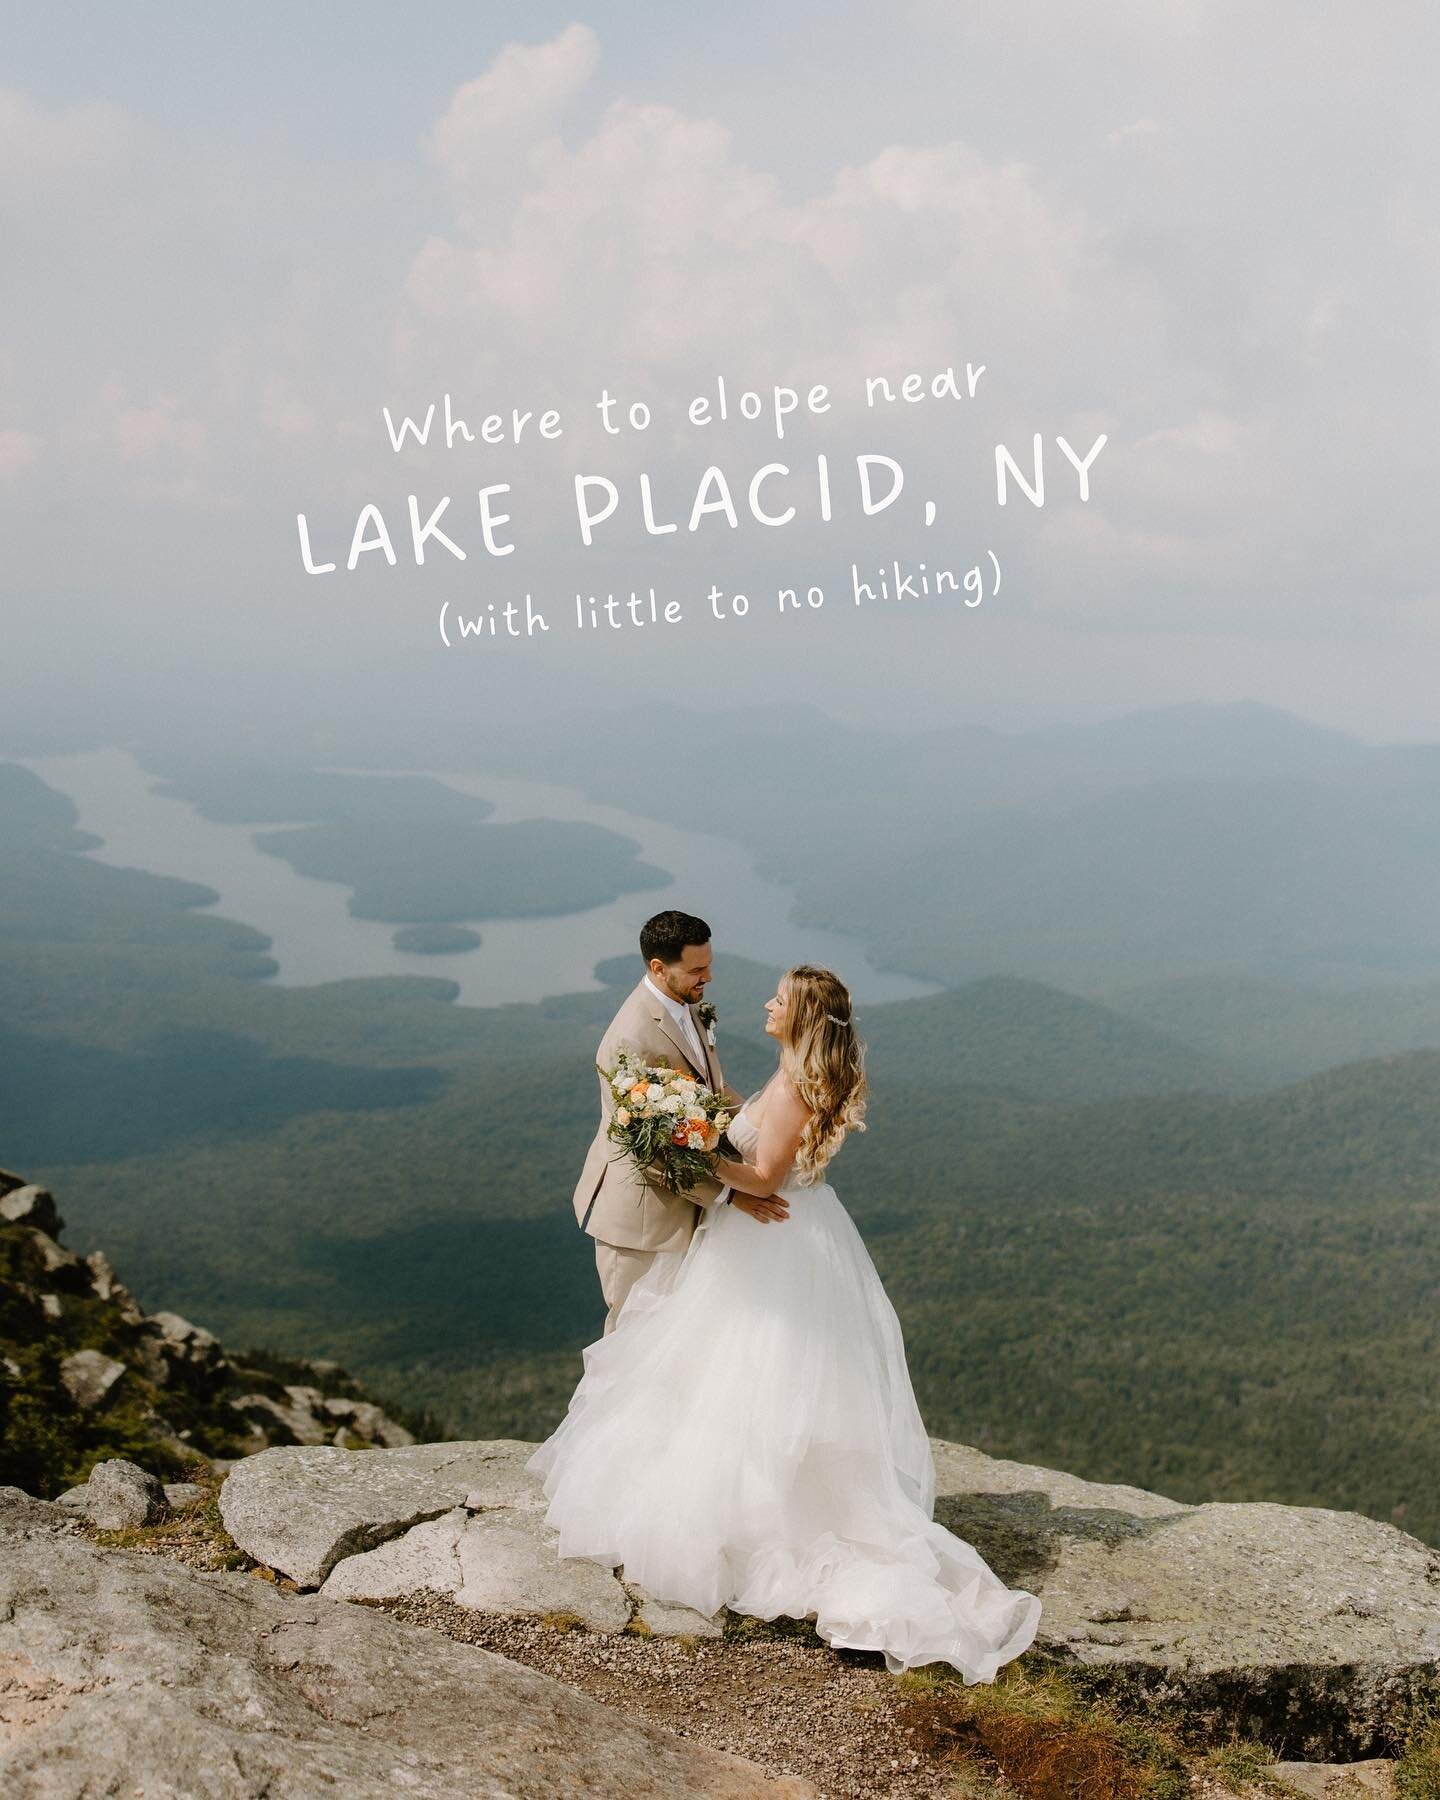 6 easily accessible elopement locations in the Adirondacks ⤵️

These are all locations within close proximity to Lake Placid, NY - the perfect home base for your celebration in the mountains ✨

(📌 SAVE this post for later planning!)

1. Cobble Looko